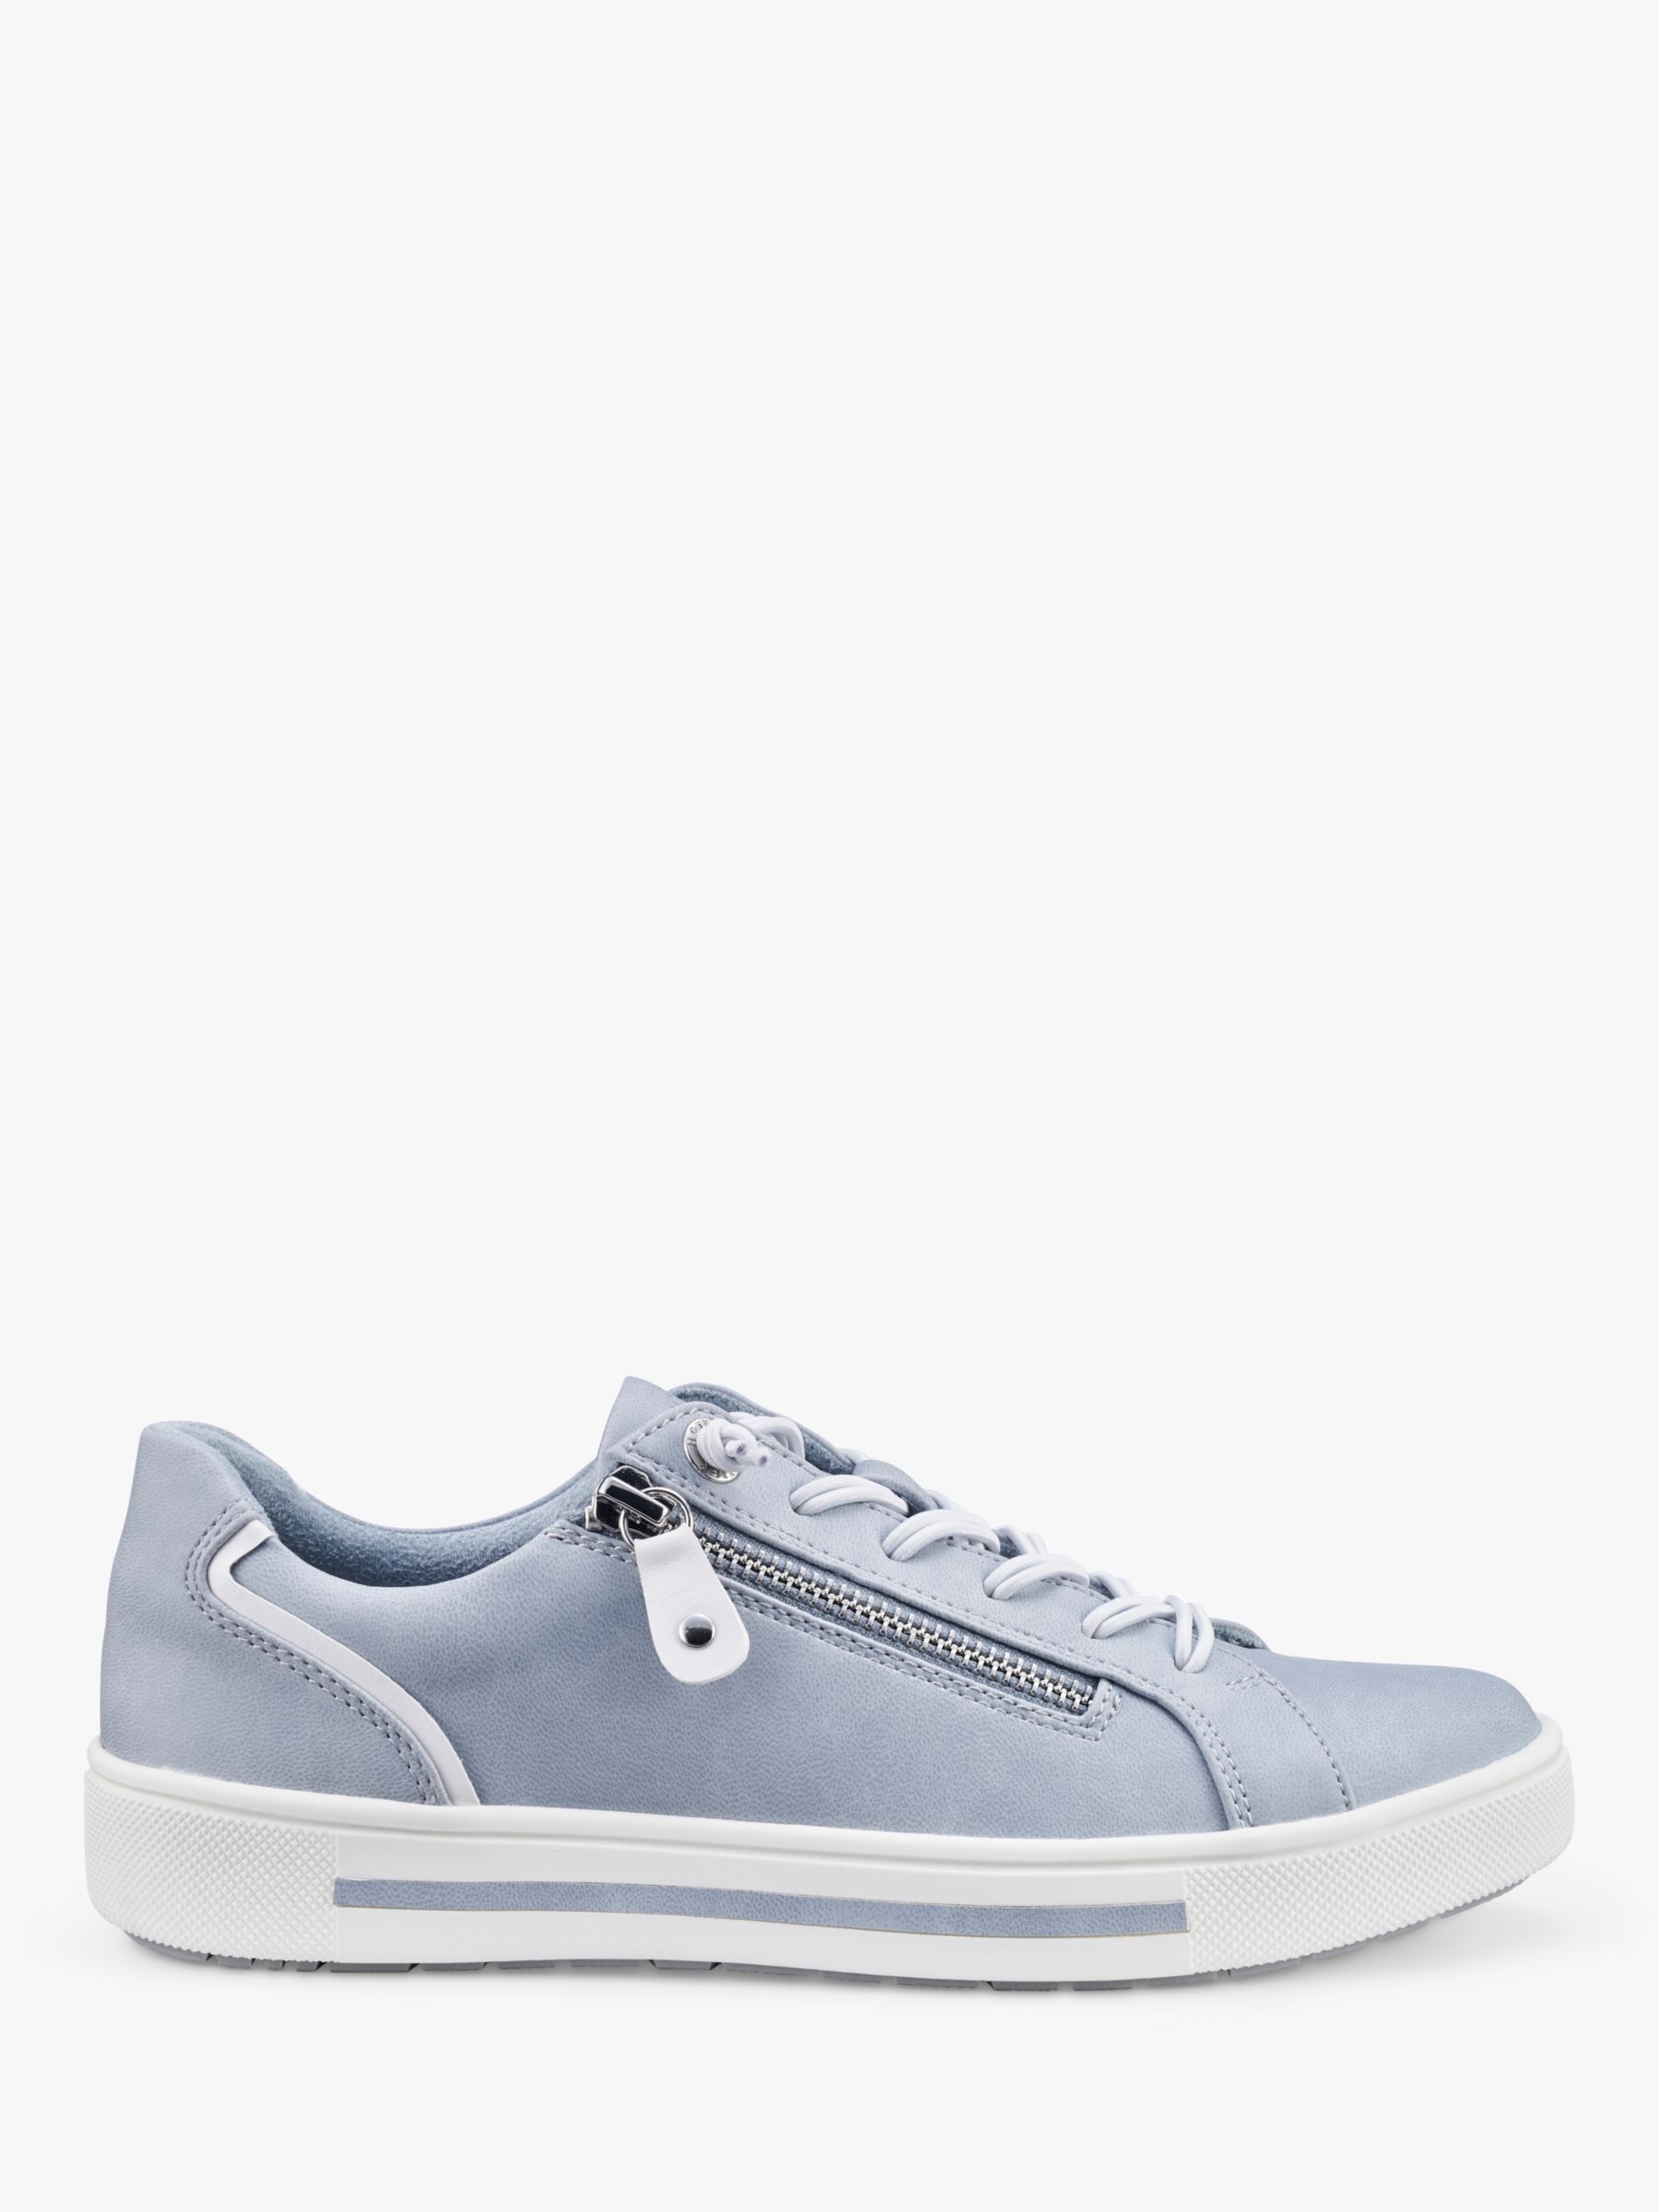 Buy Hotter Leo Zipped Trainers Online at johnlewis.com